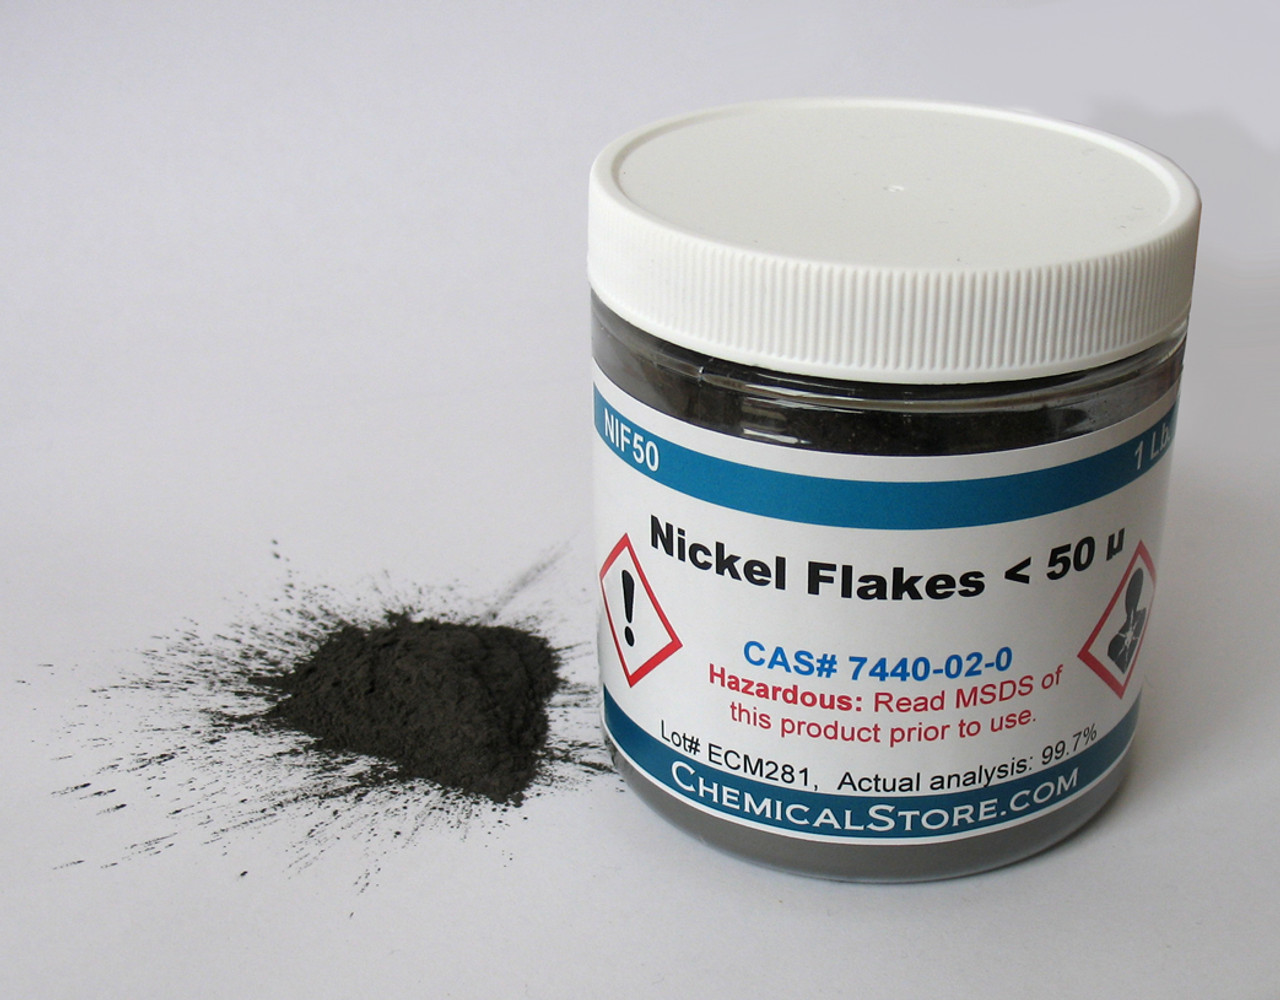 Fine nickel powder flaked grade 50 is an irregular-shaped platelet with high average aspect ratio ideal for a range of applications such as Anti-seize lubricants, Conductive coatings, Pigments and binders.